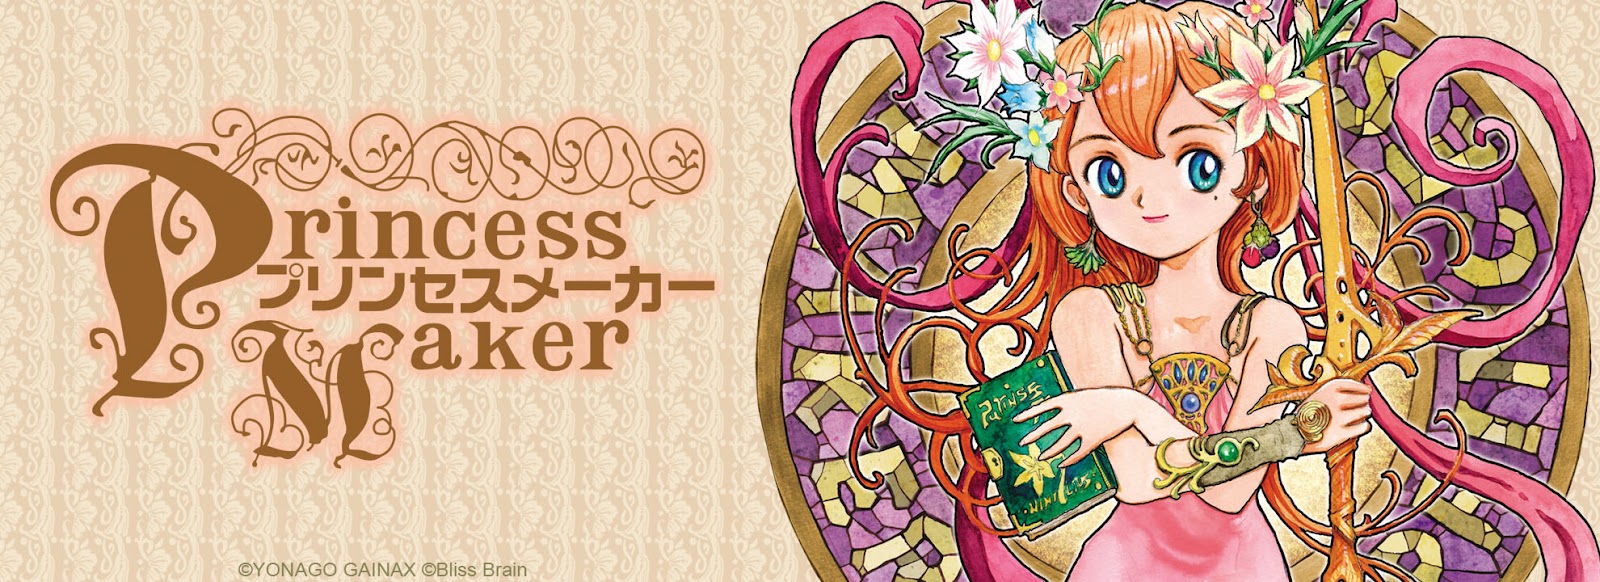 Official banner logo that shows a beautiful princess, drawn in a manga style.